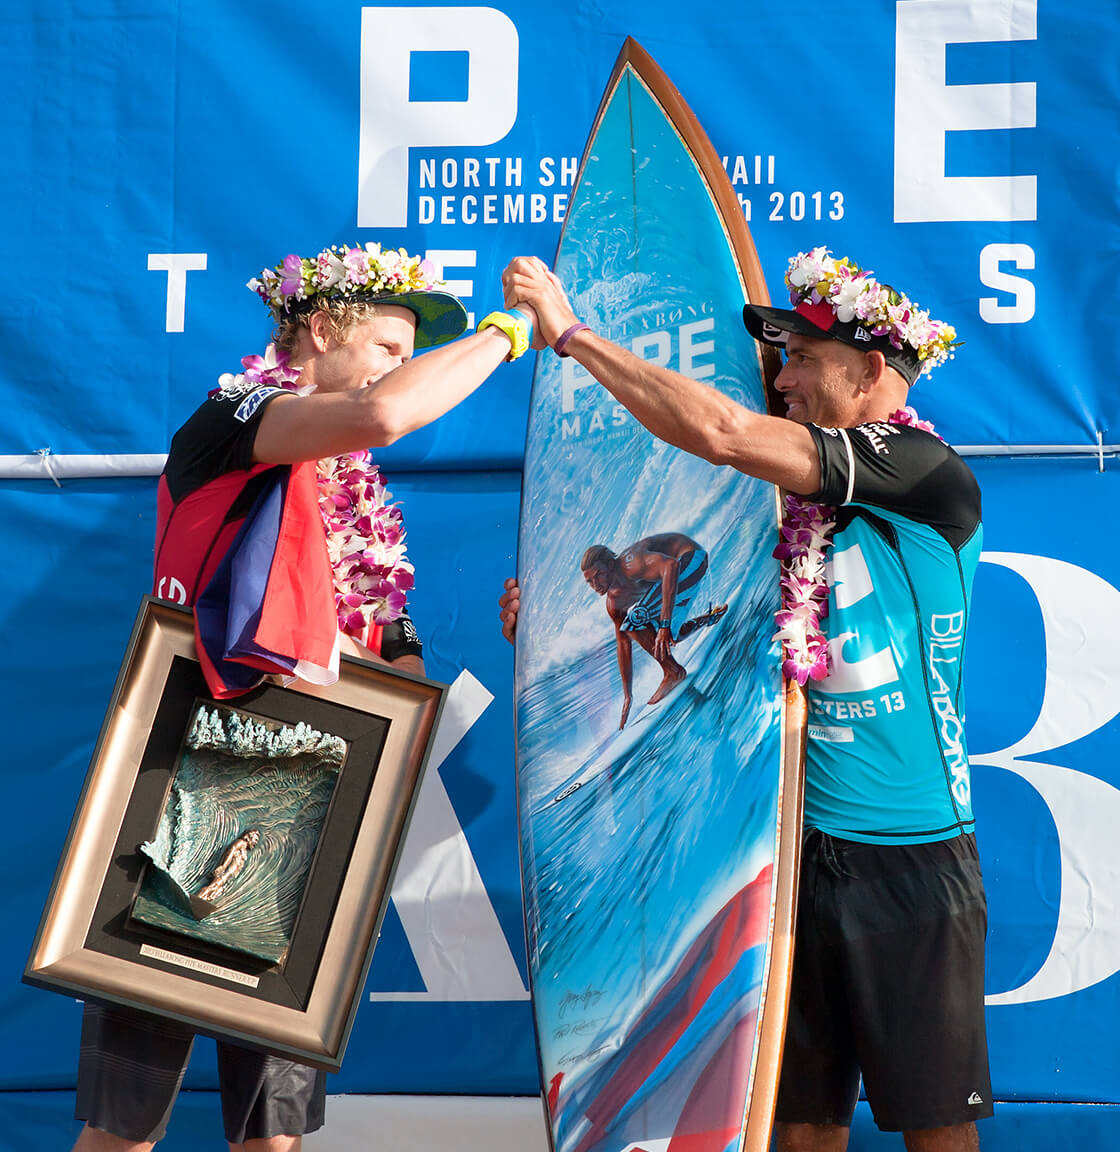 2013 Pipe Masters winner, Kelly Slater with John John Florence and the Pipe Masters trophy surfboard